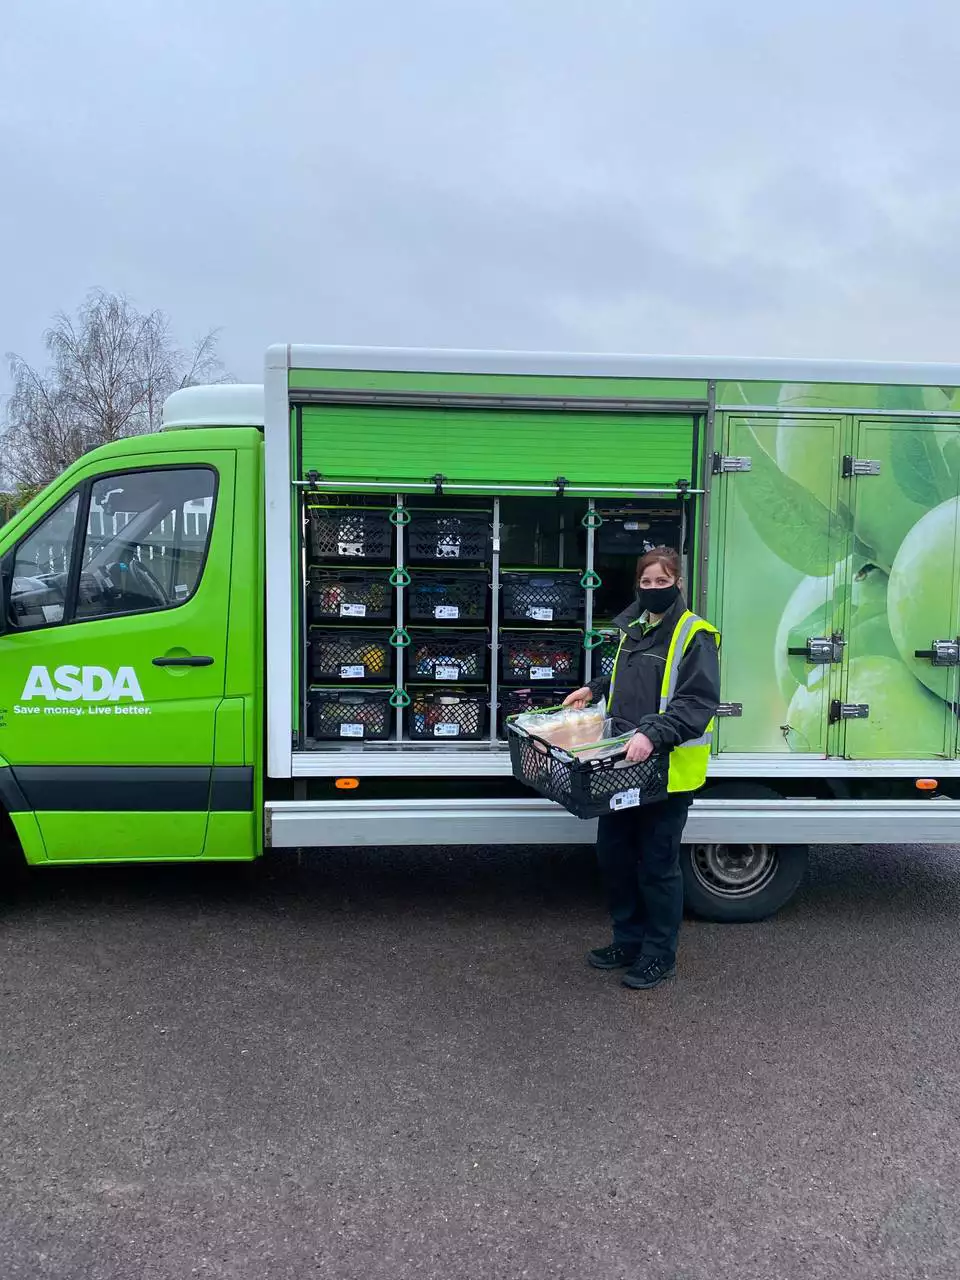 Asda delivery driver Clare Dring loves taking photos on her rounds in Bristol and Bath